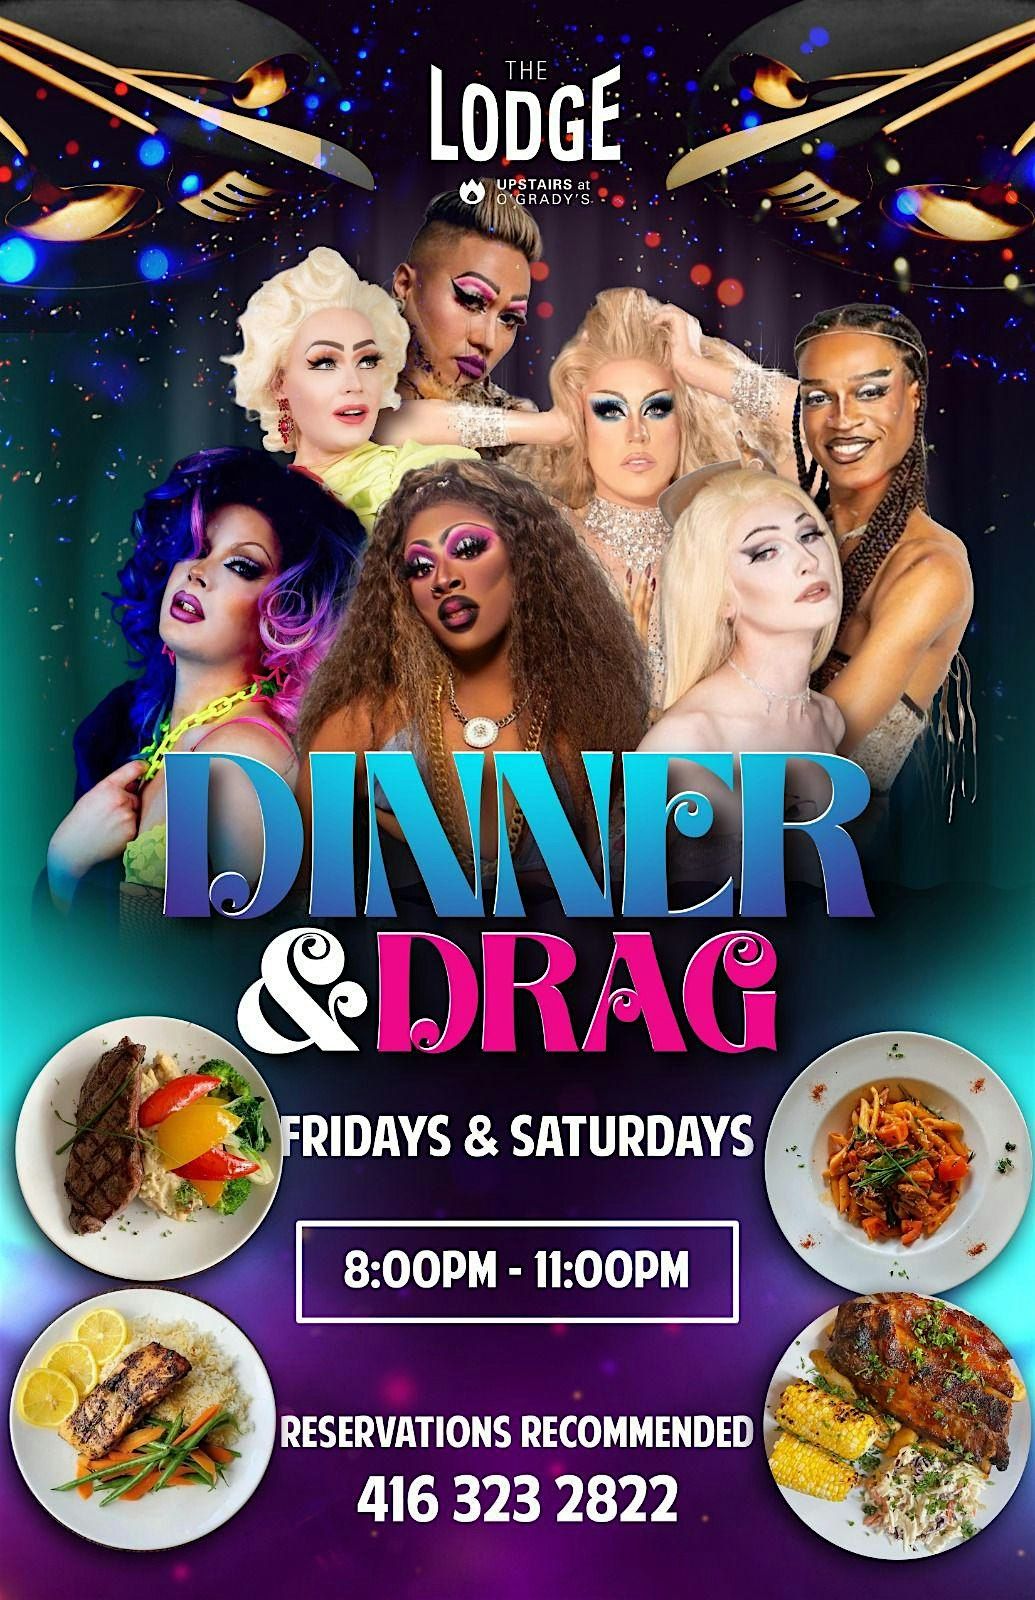 Pride Dinner and Drag Show- Sunday